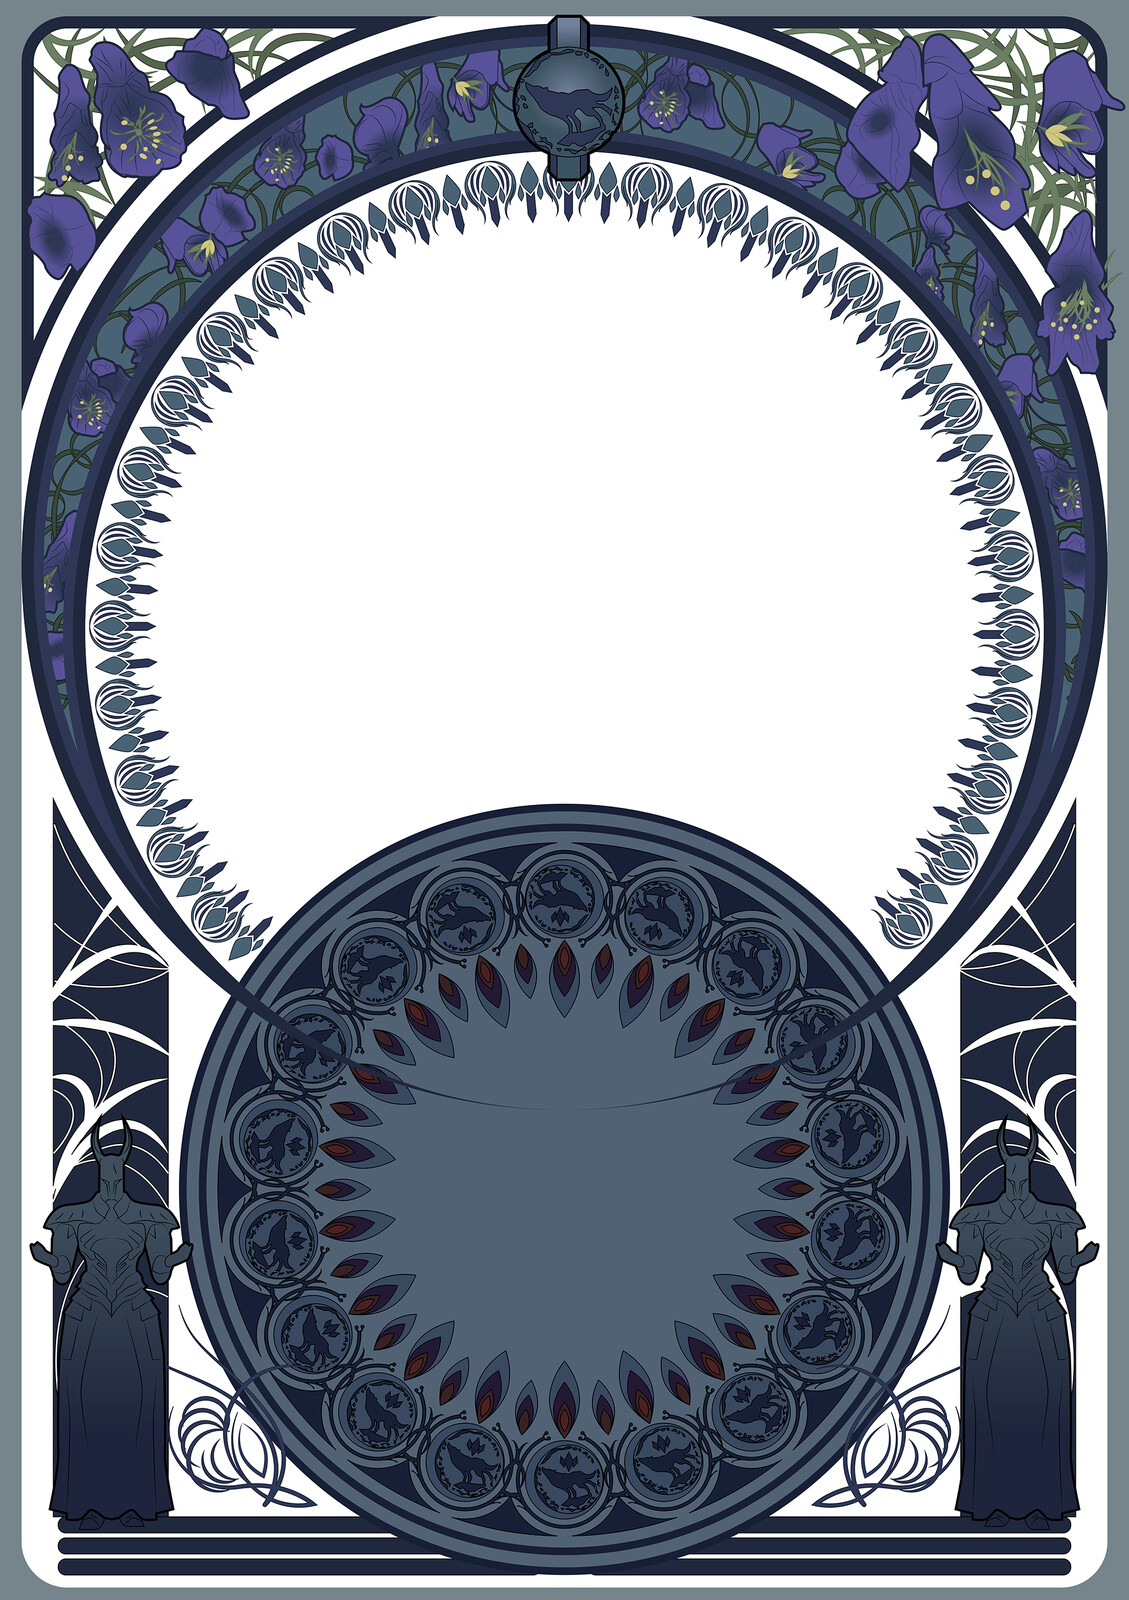 Frame and Architecture made with Illustrator